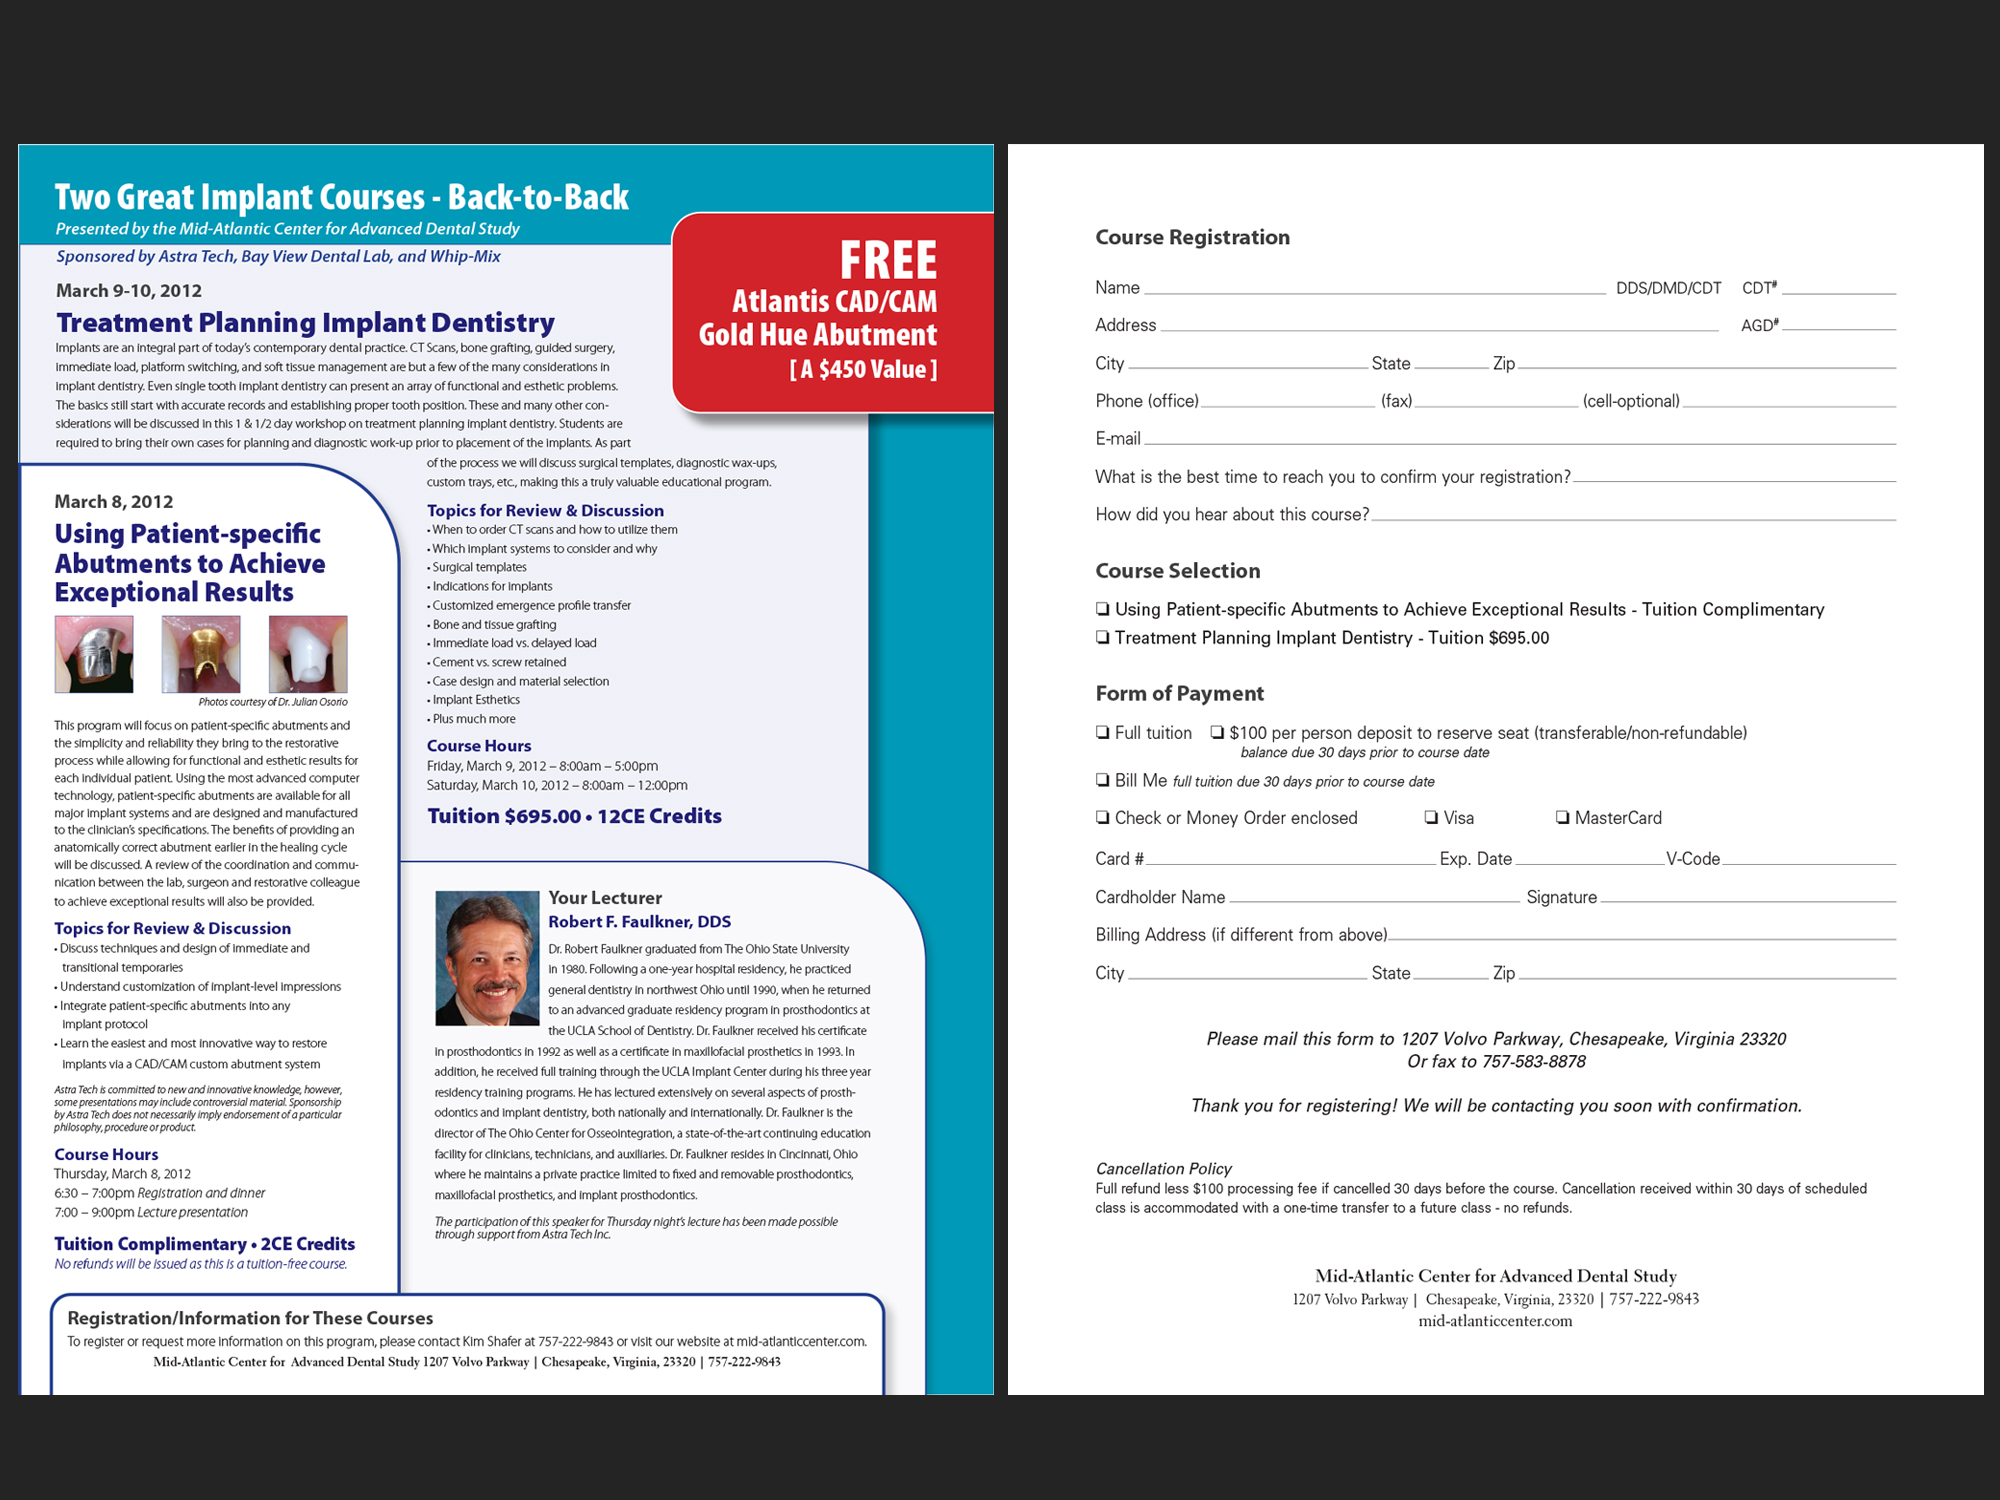 Two Great Implant Courses - Mid-Atlantic Center, 2011; mailer.